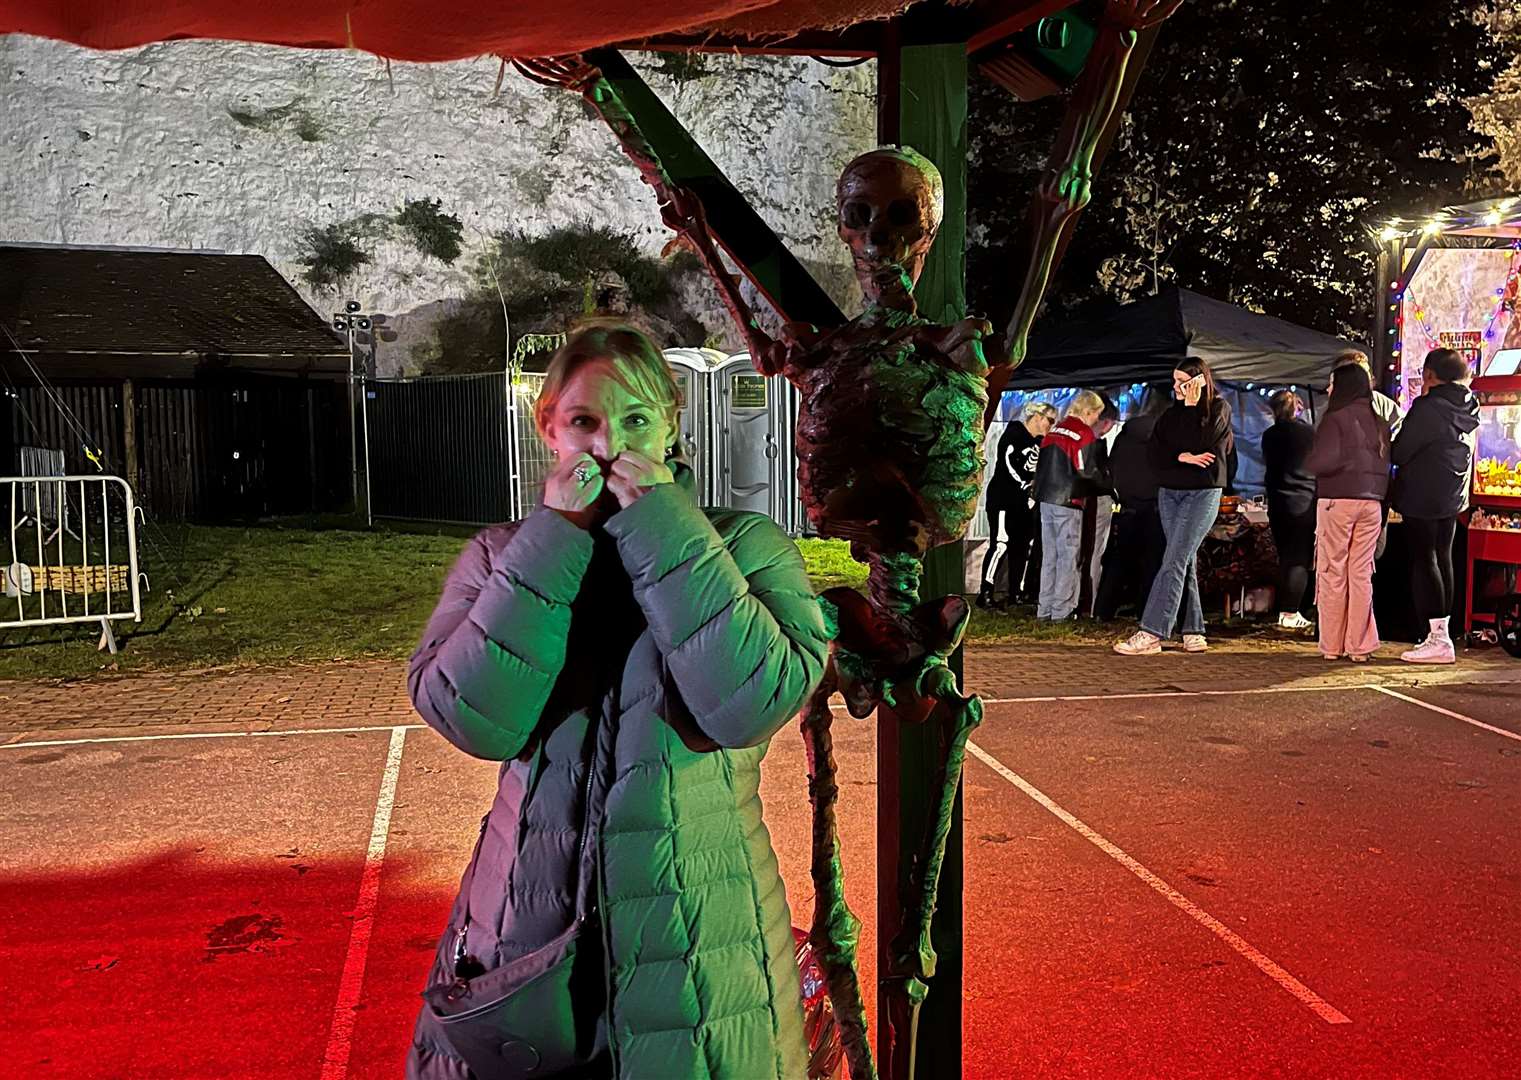 Reporter Keely Greenwood faced her fears in the scare maze at Fort Amherst in Chatham